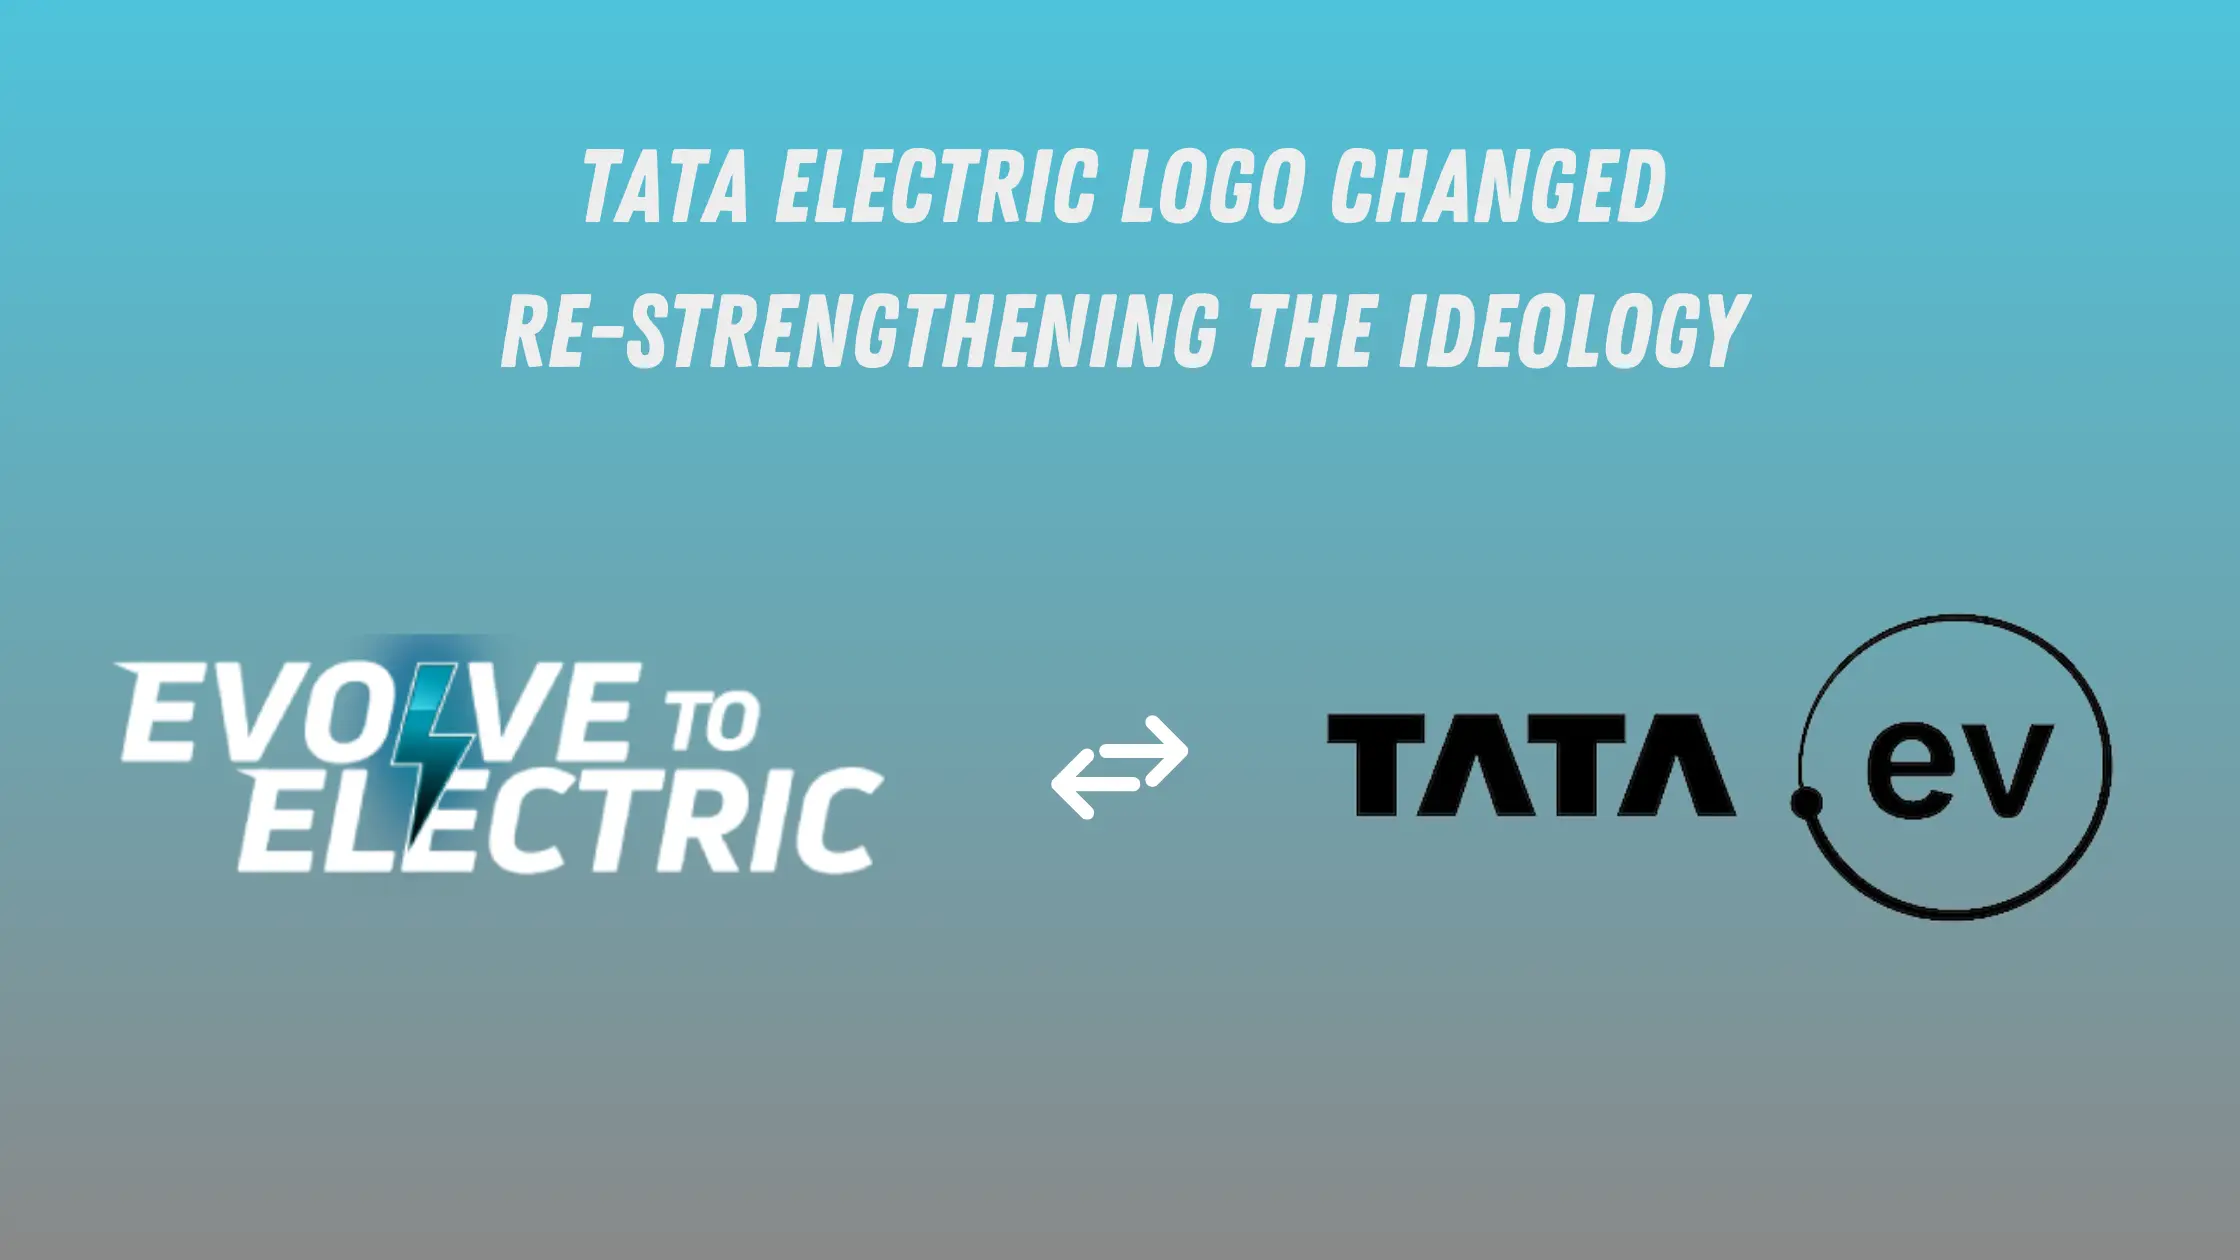 You are currently viewing “Tata EV” is Renamed to Tata.ev, Here’s why it matters.